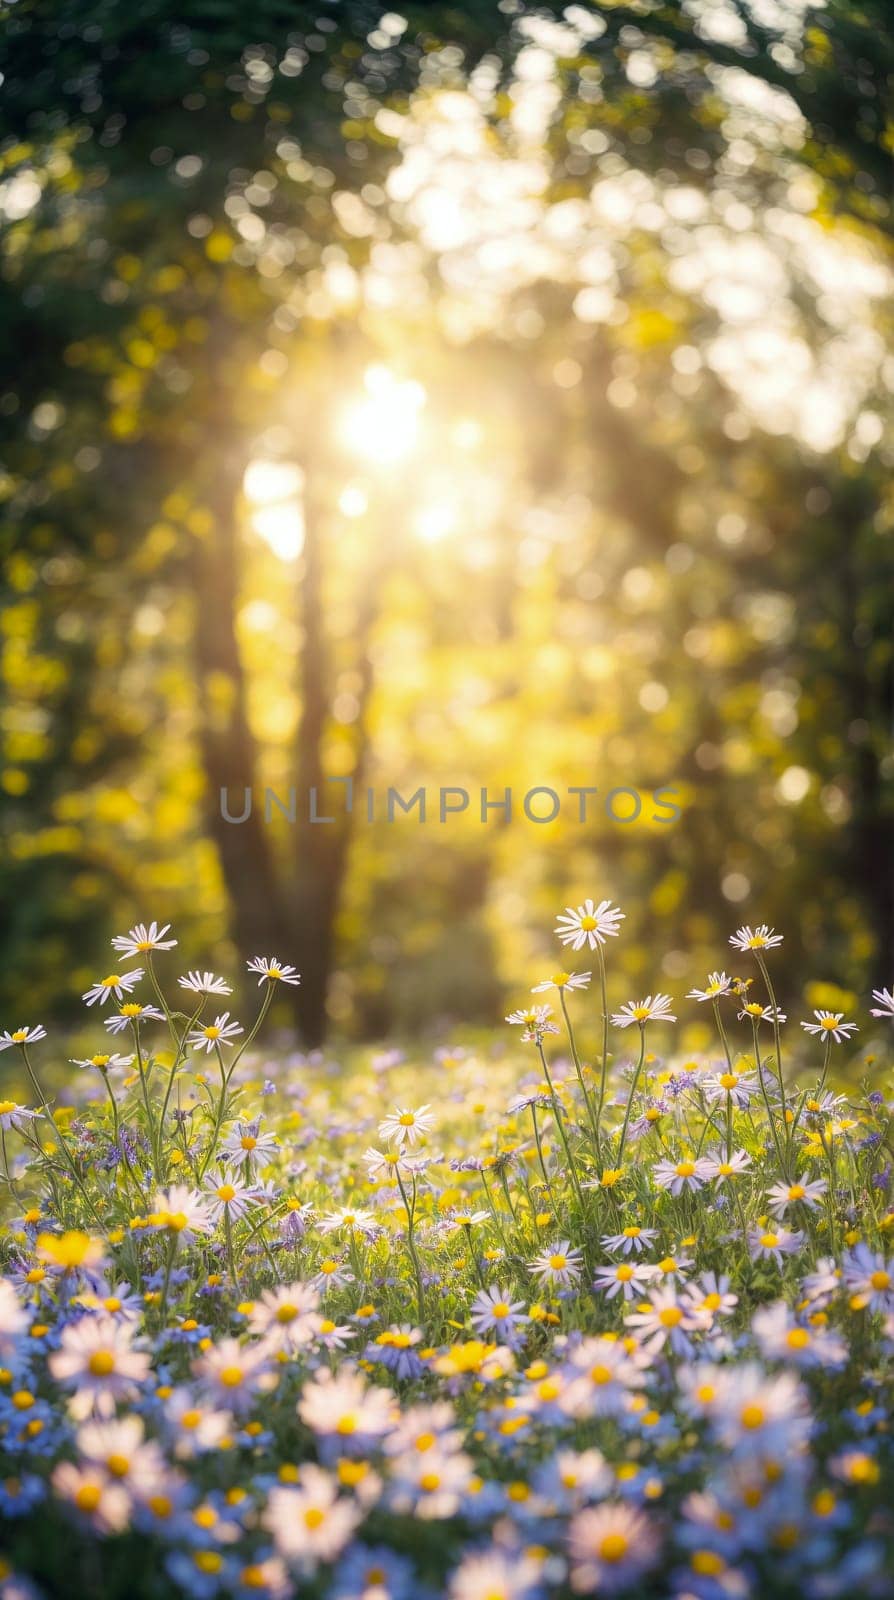 A sunlit field of daisies with rays of sunshine filtering through the trees.